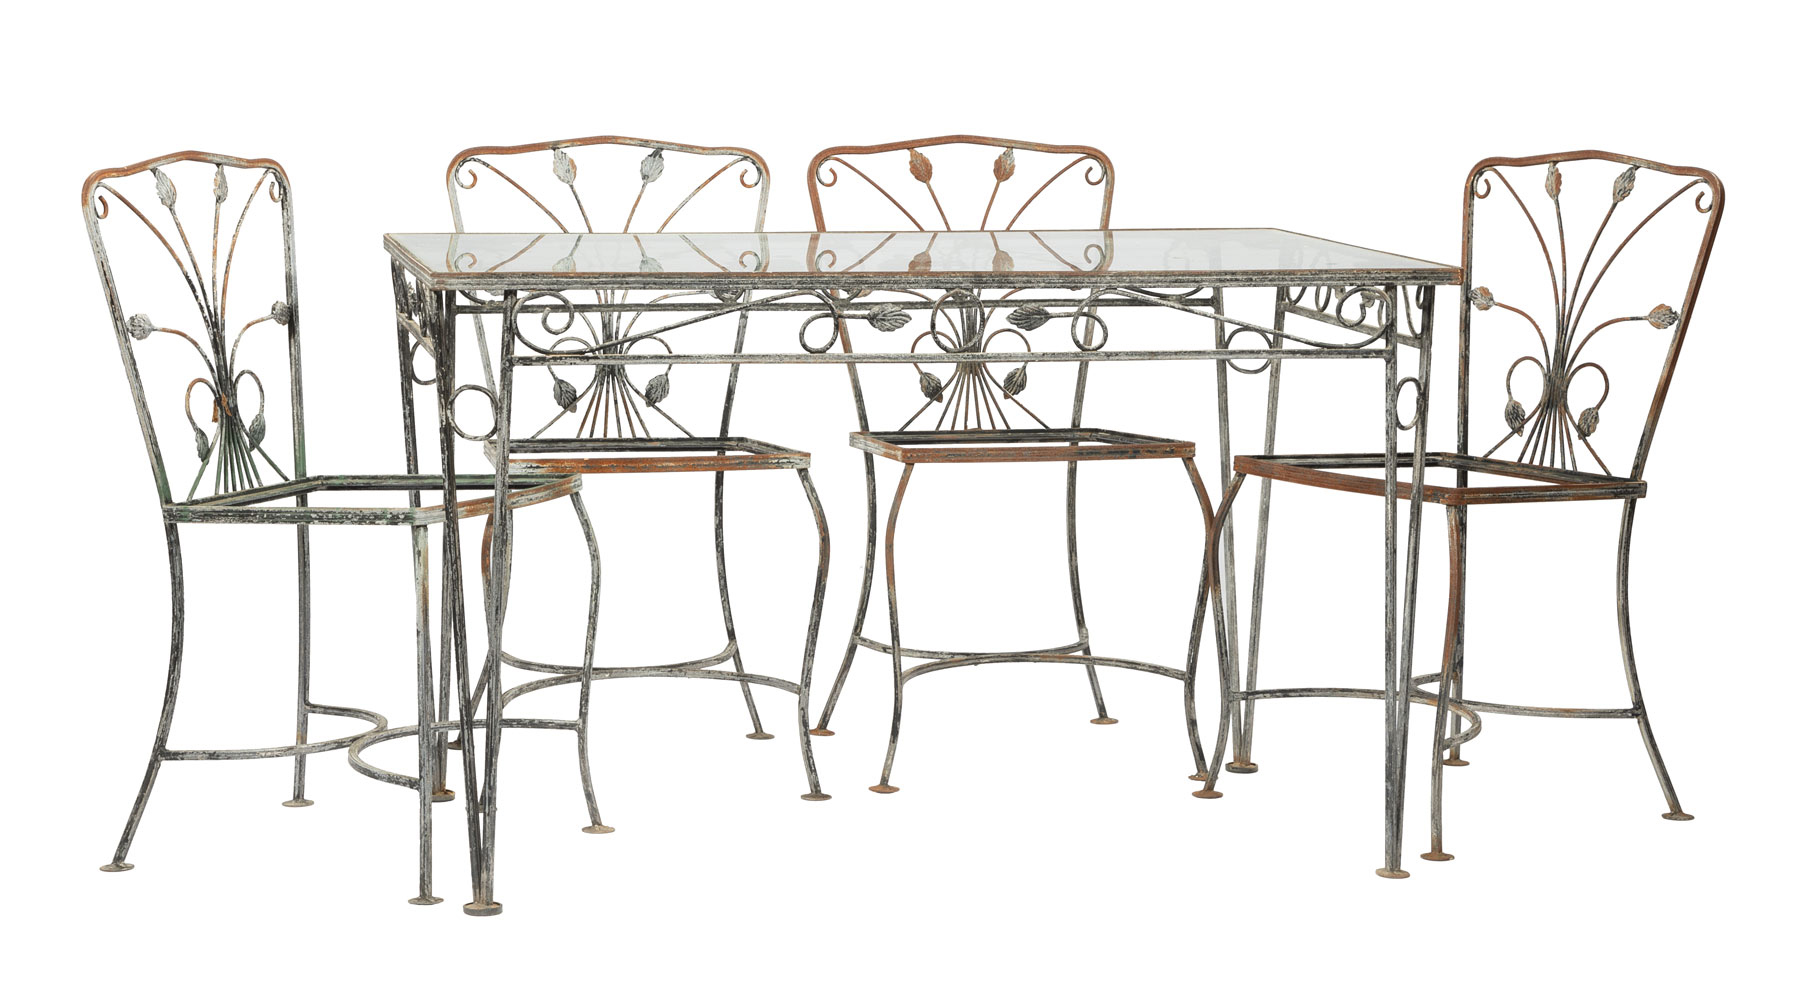 Vintage Wrought Iron Garden Suite, incl. four chairs and table with associated glass top, scroll and